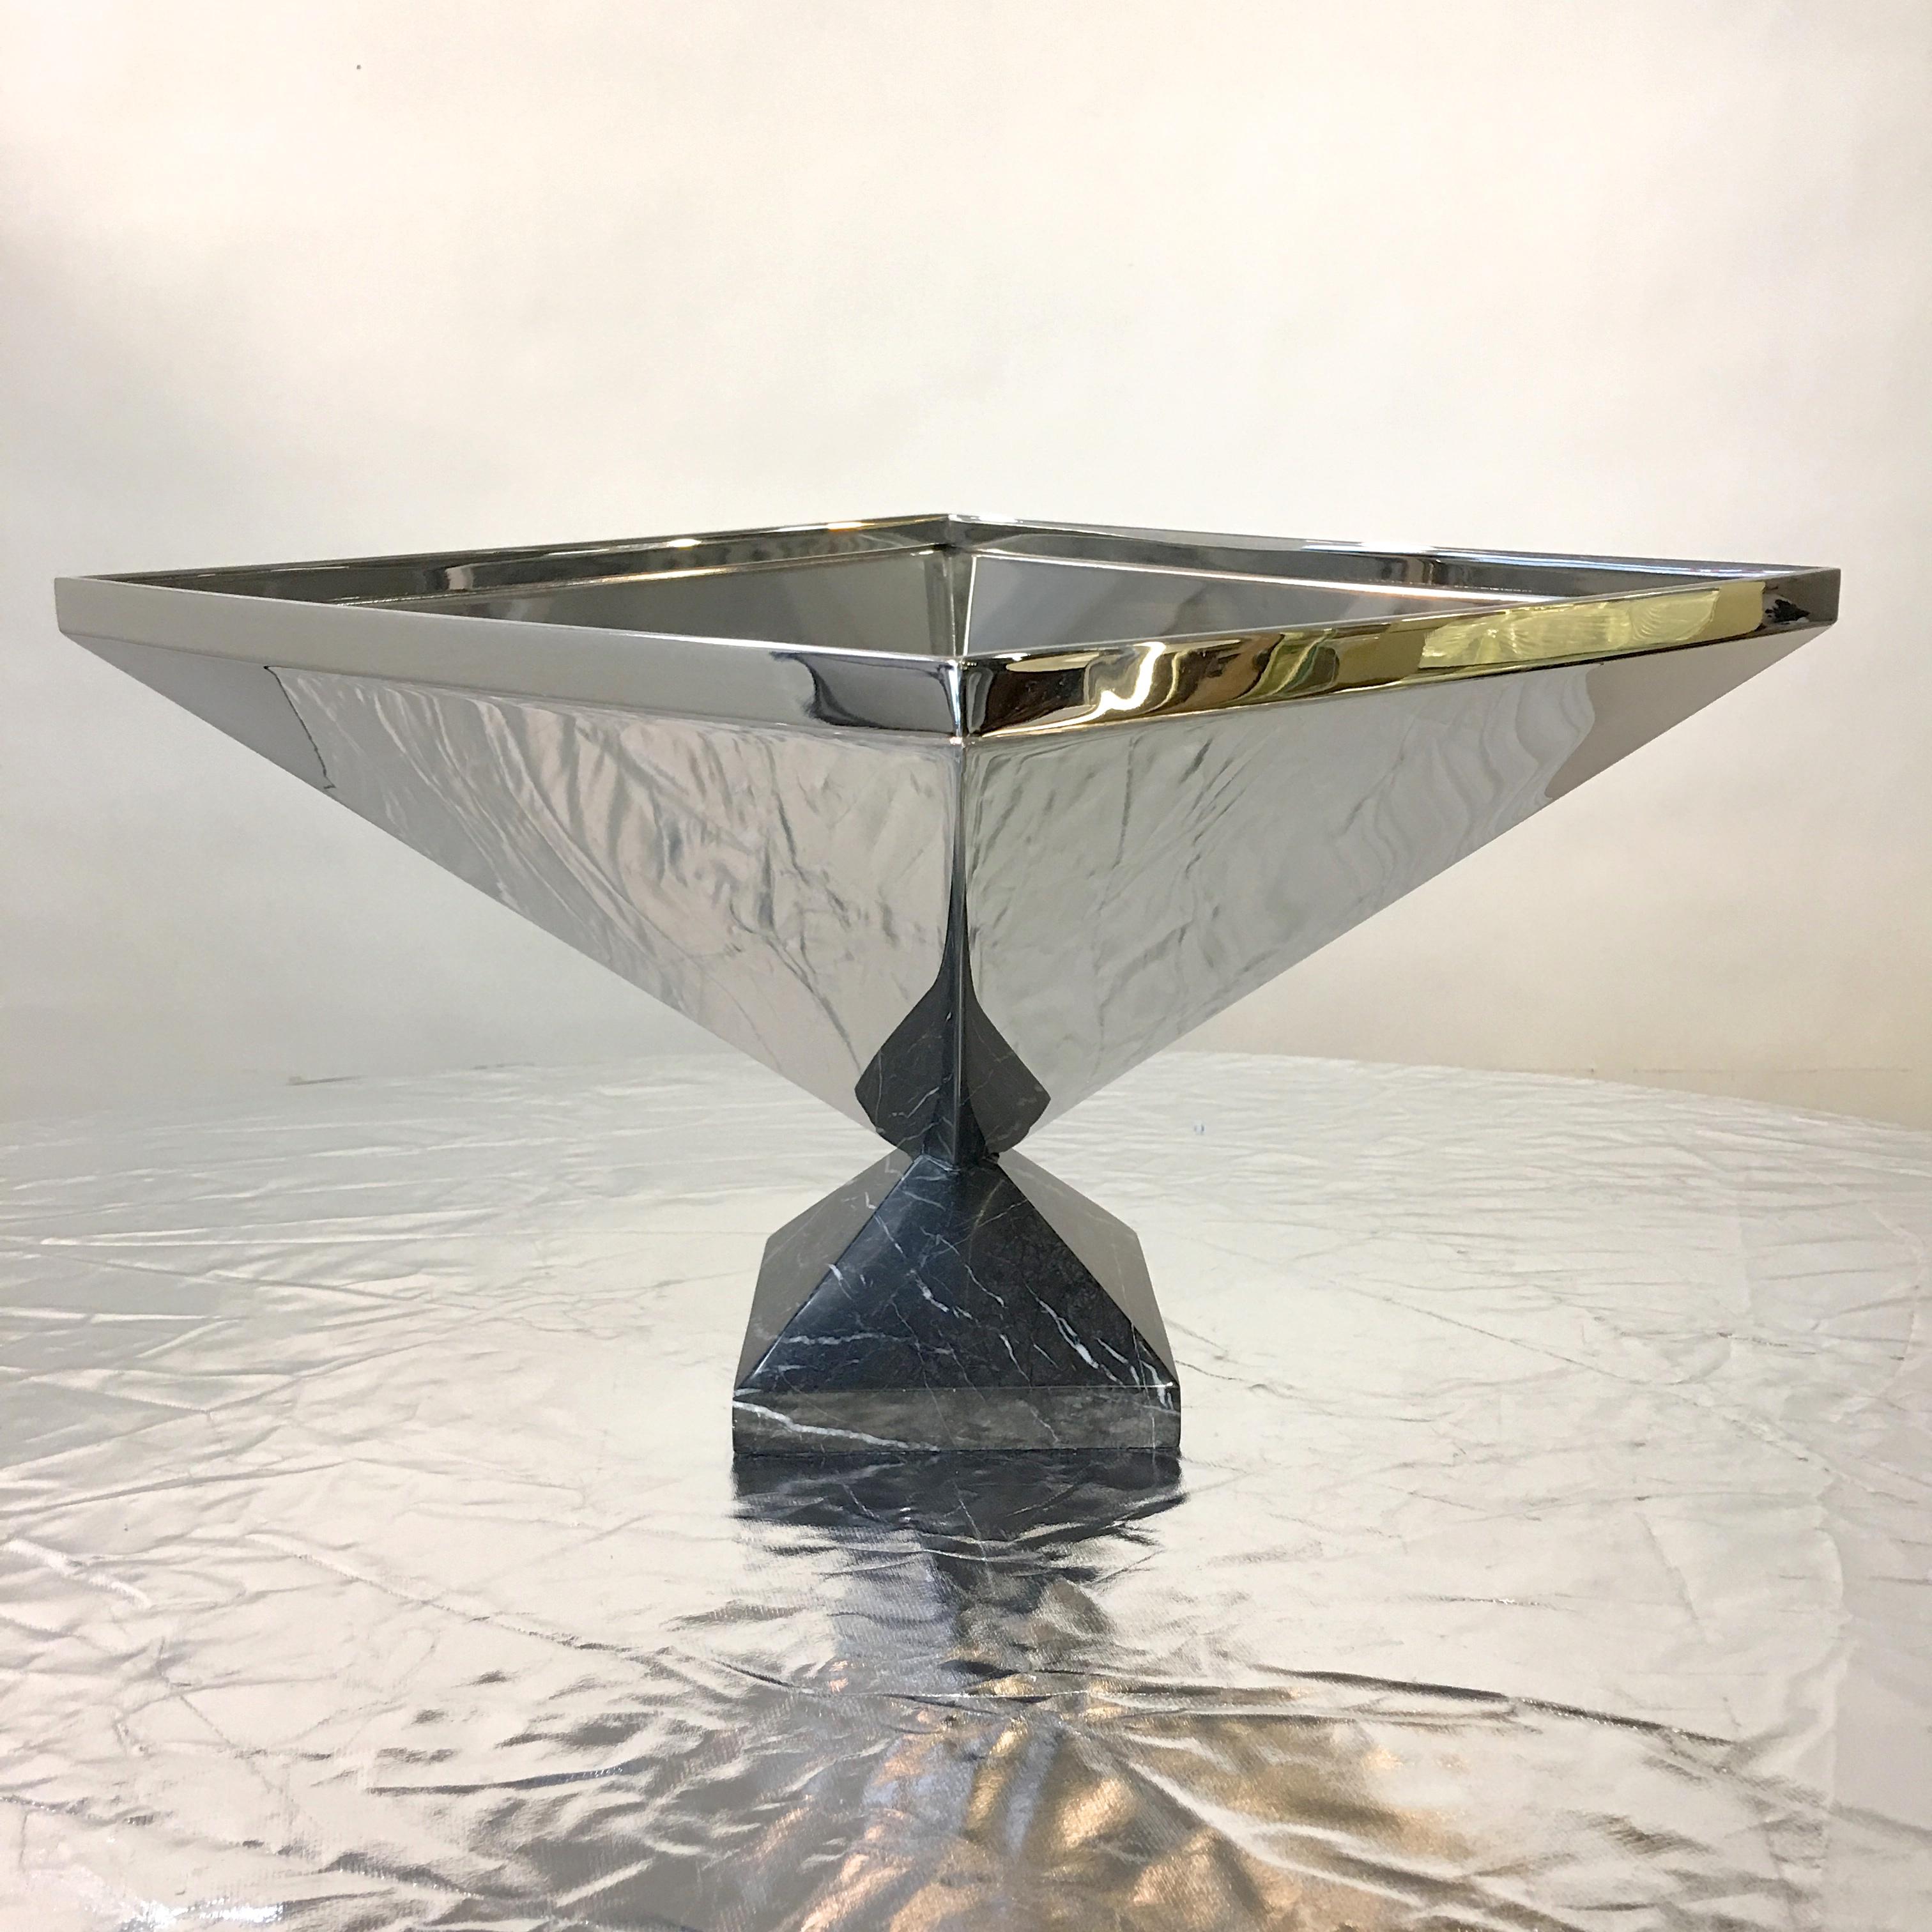 Inverted Pyramid Polished Stainless Centerpiece on Marble Pyramid Base 5